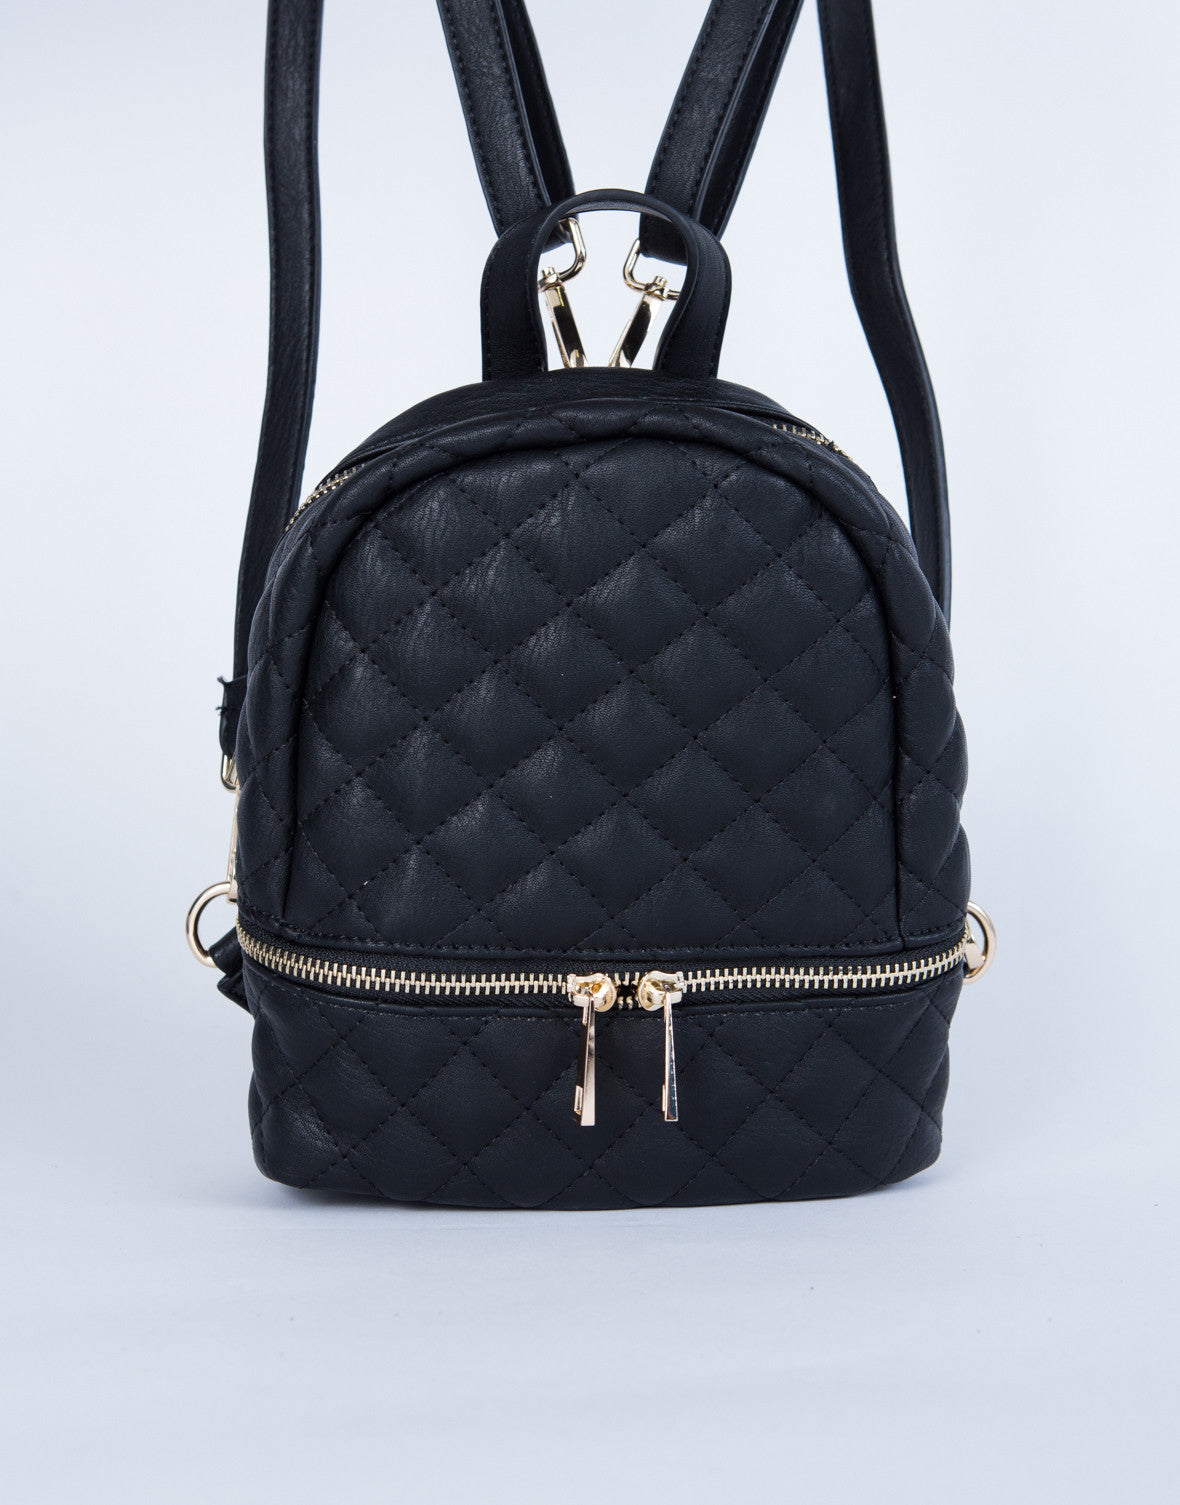 Mini Quilted Leather Backpack - Black Leather Backpack - Quilted Bag – 2020AVE